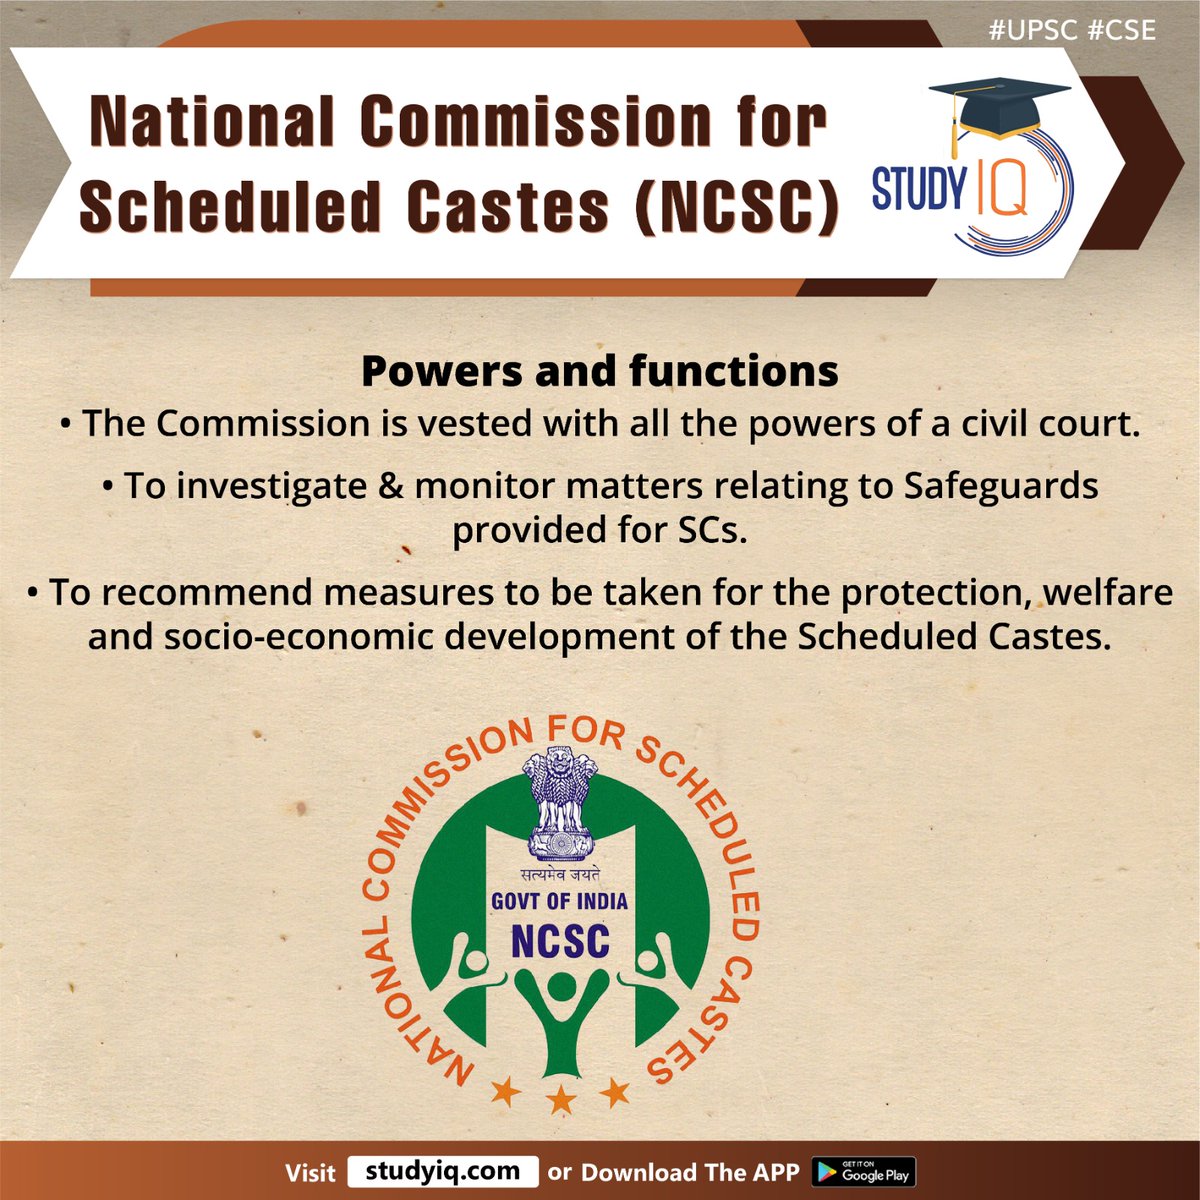 National Commission for Scheduled Castes (NCSC)

#nationalcommissionforscheduledcastes #ncsc #scheduledcastes #fooddeliverycompany #dalitcommunity #unionministryofsocialjusticeandempowerment #article338 #constitutionofindia #st #amendmentact #socialeducation #economicinterests